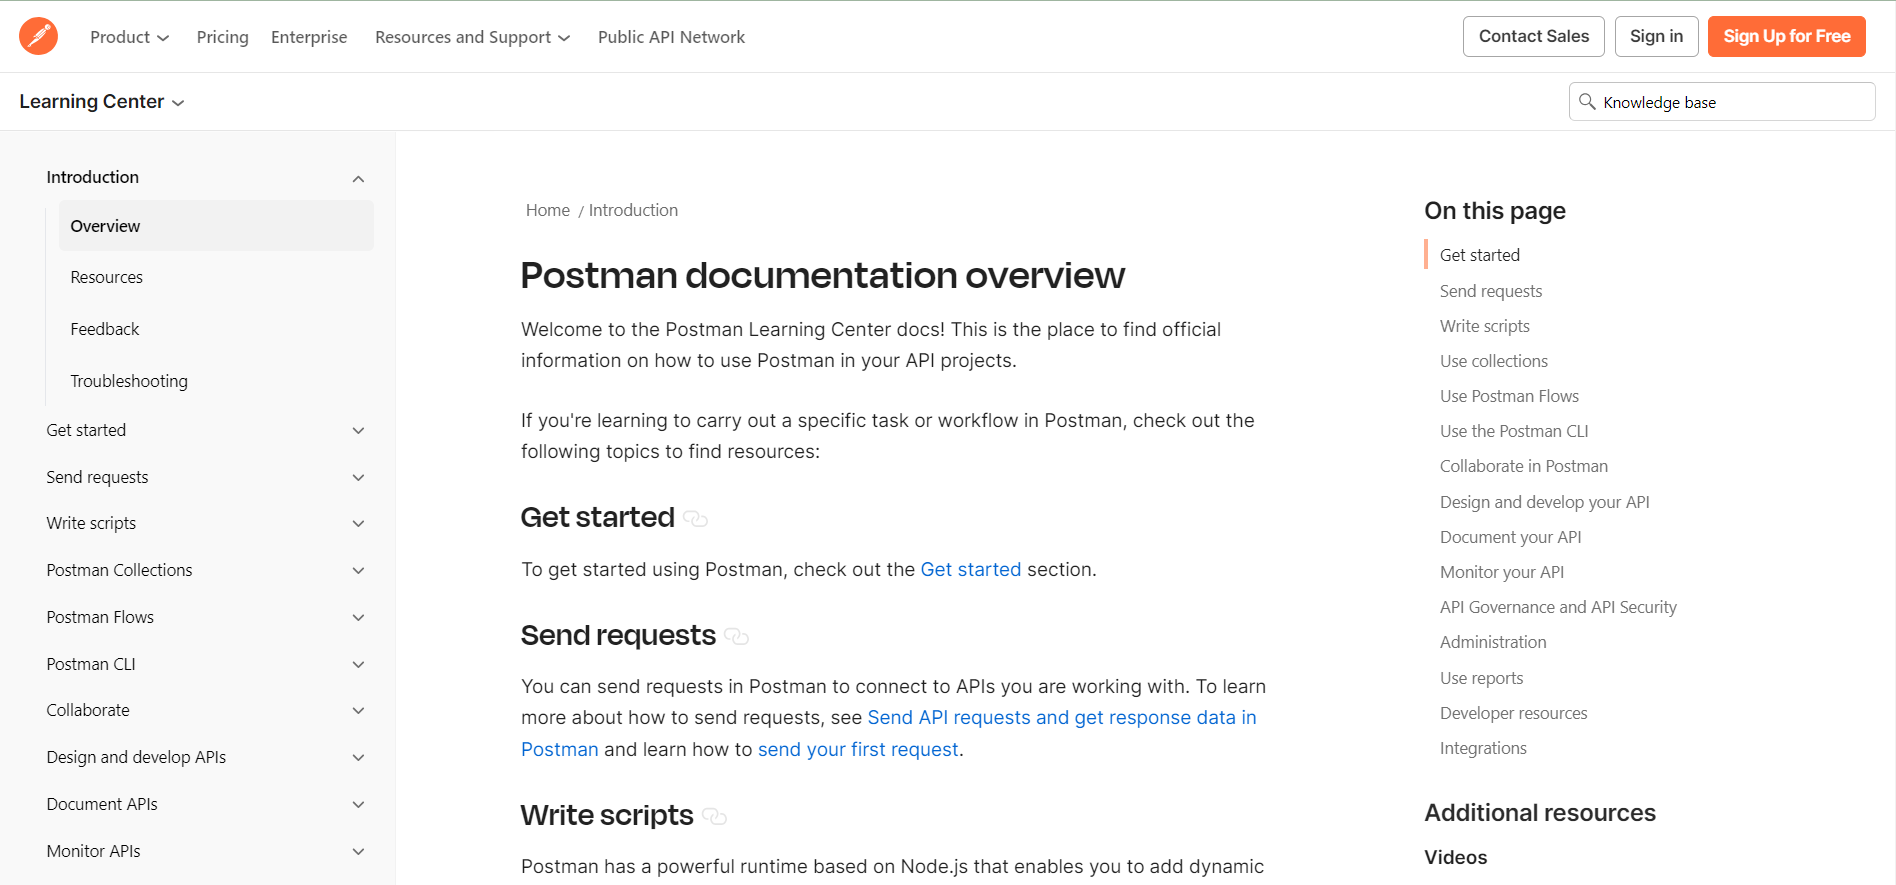 Product Documentation Example from Postman